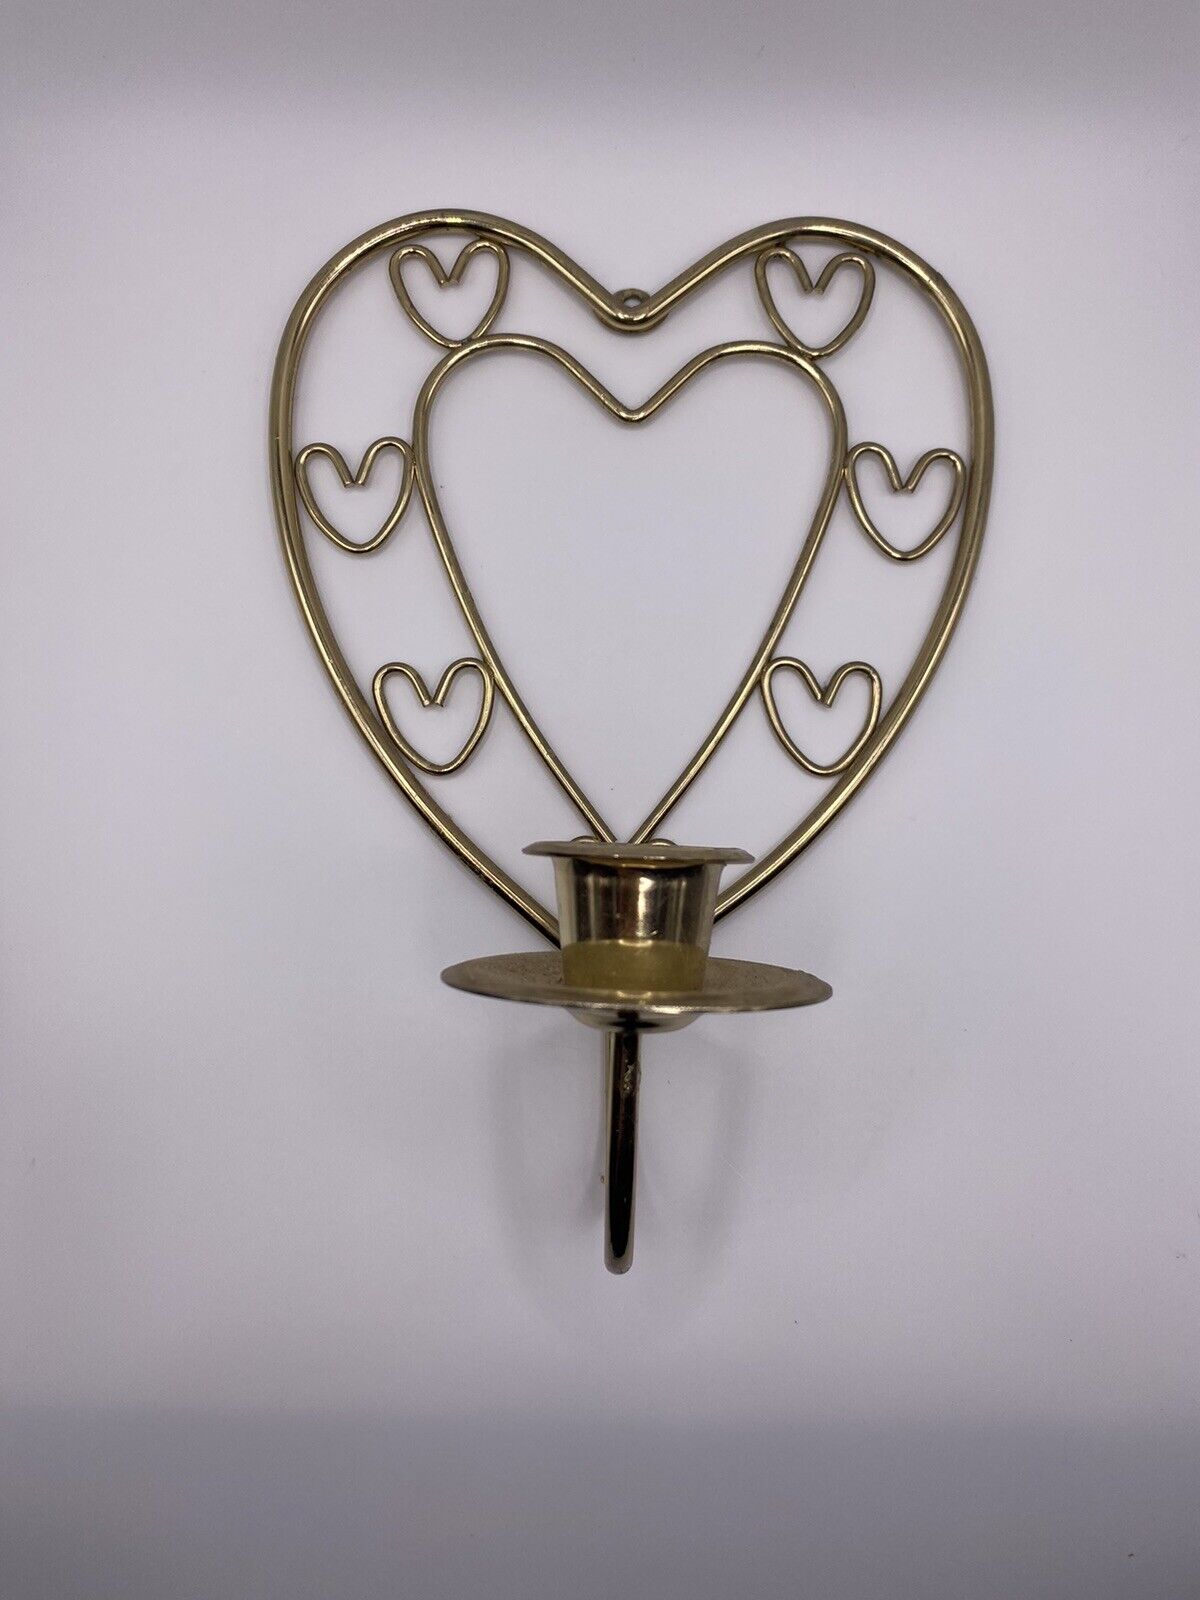 Vintage Metal Heart Taper Candle Wall Sconce